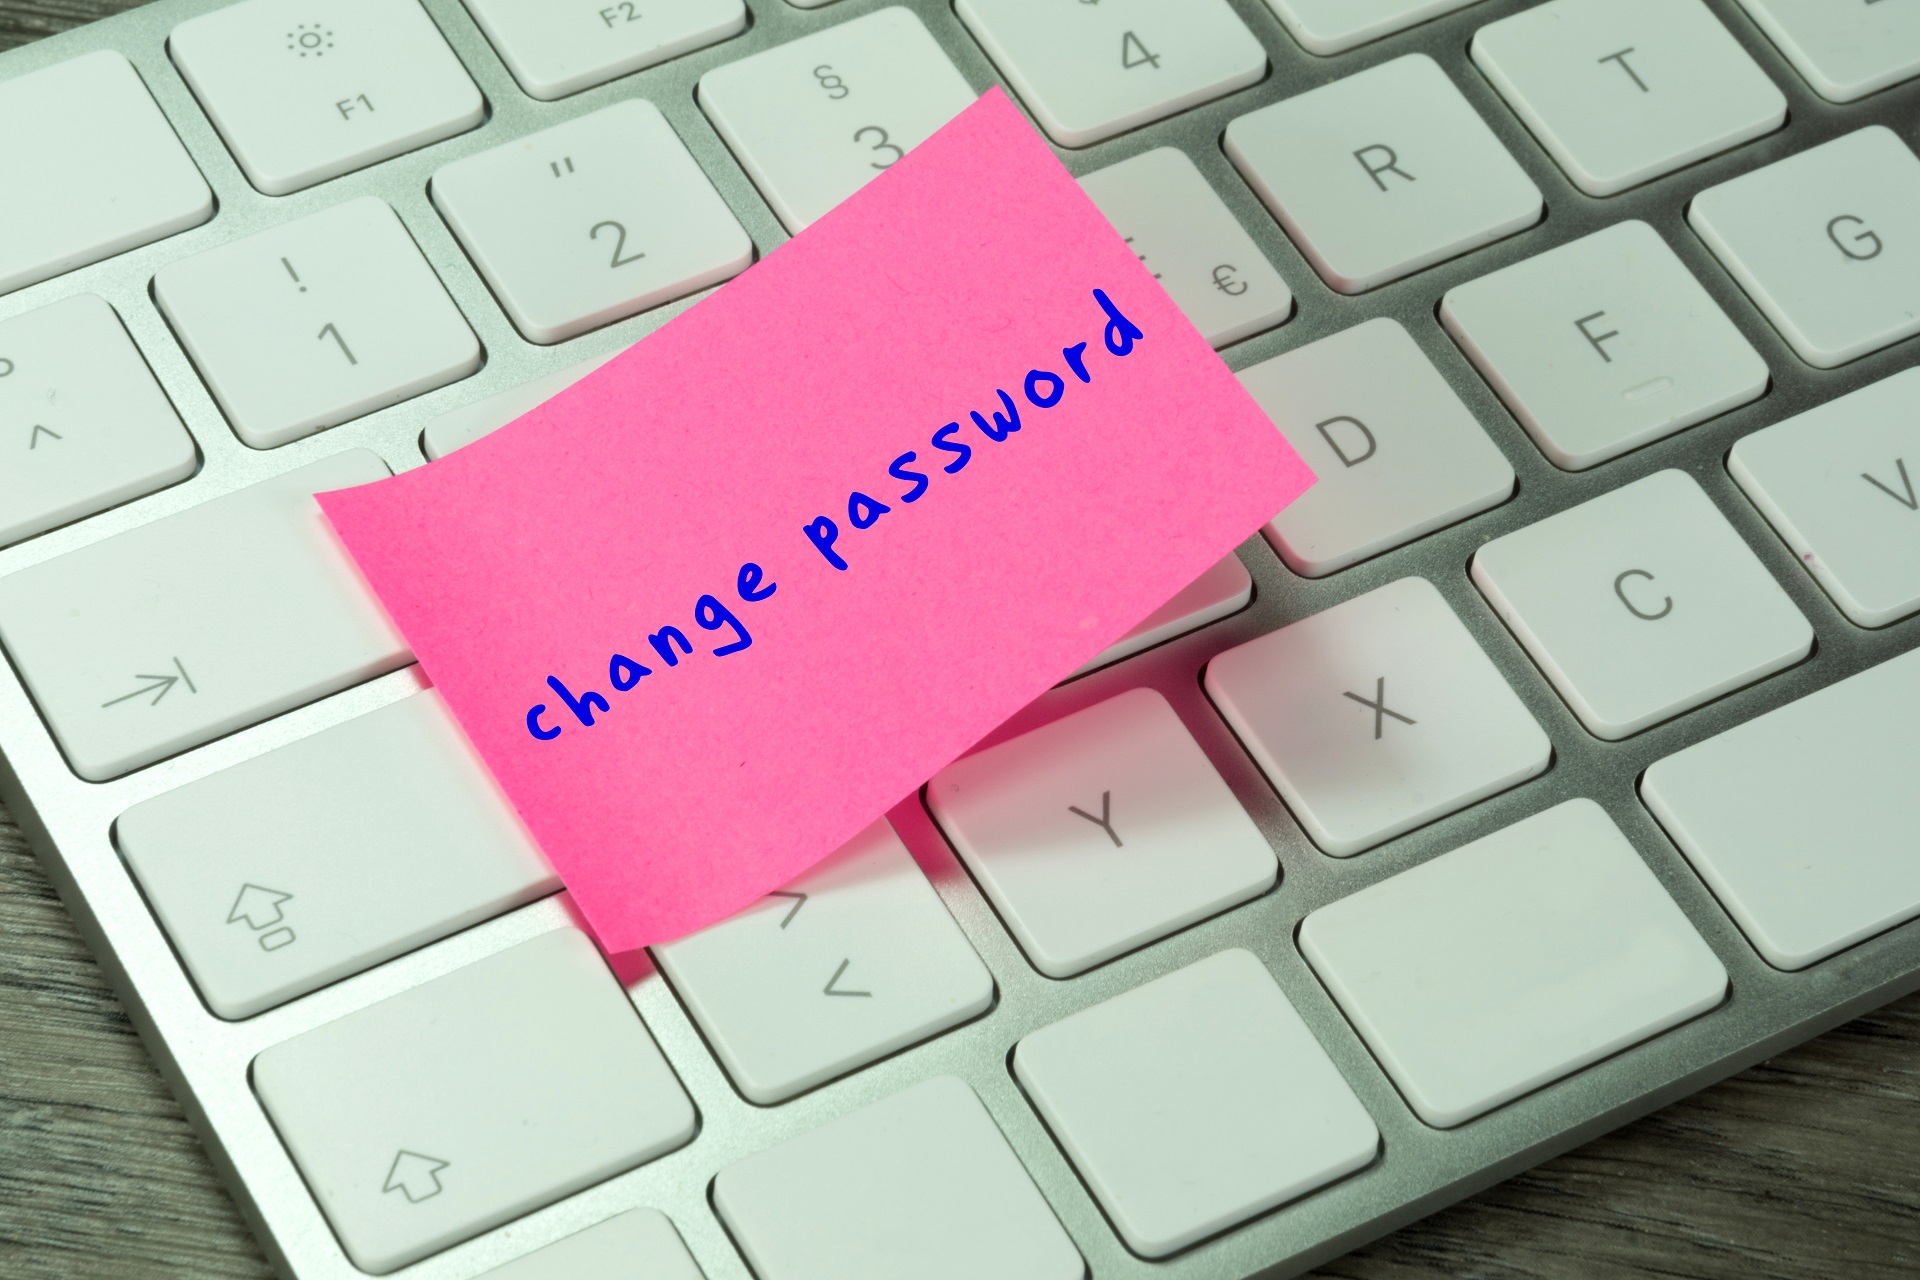 Create a passphrase instead of a password. 